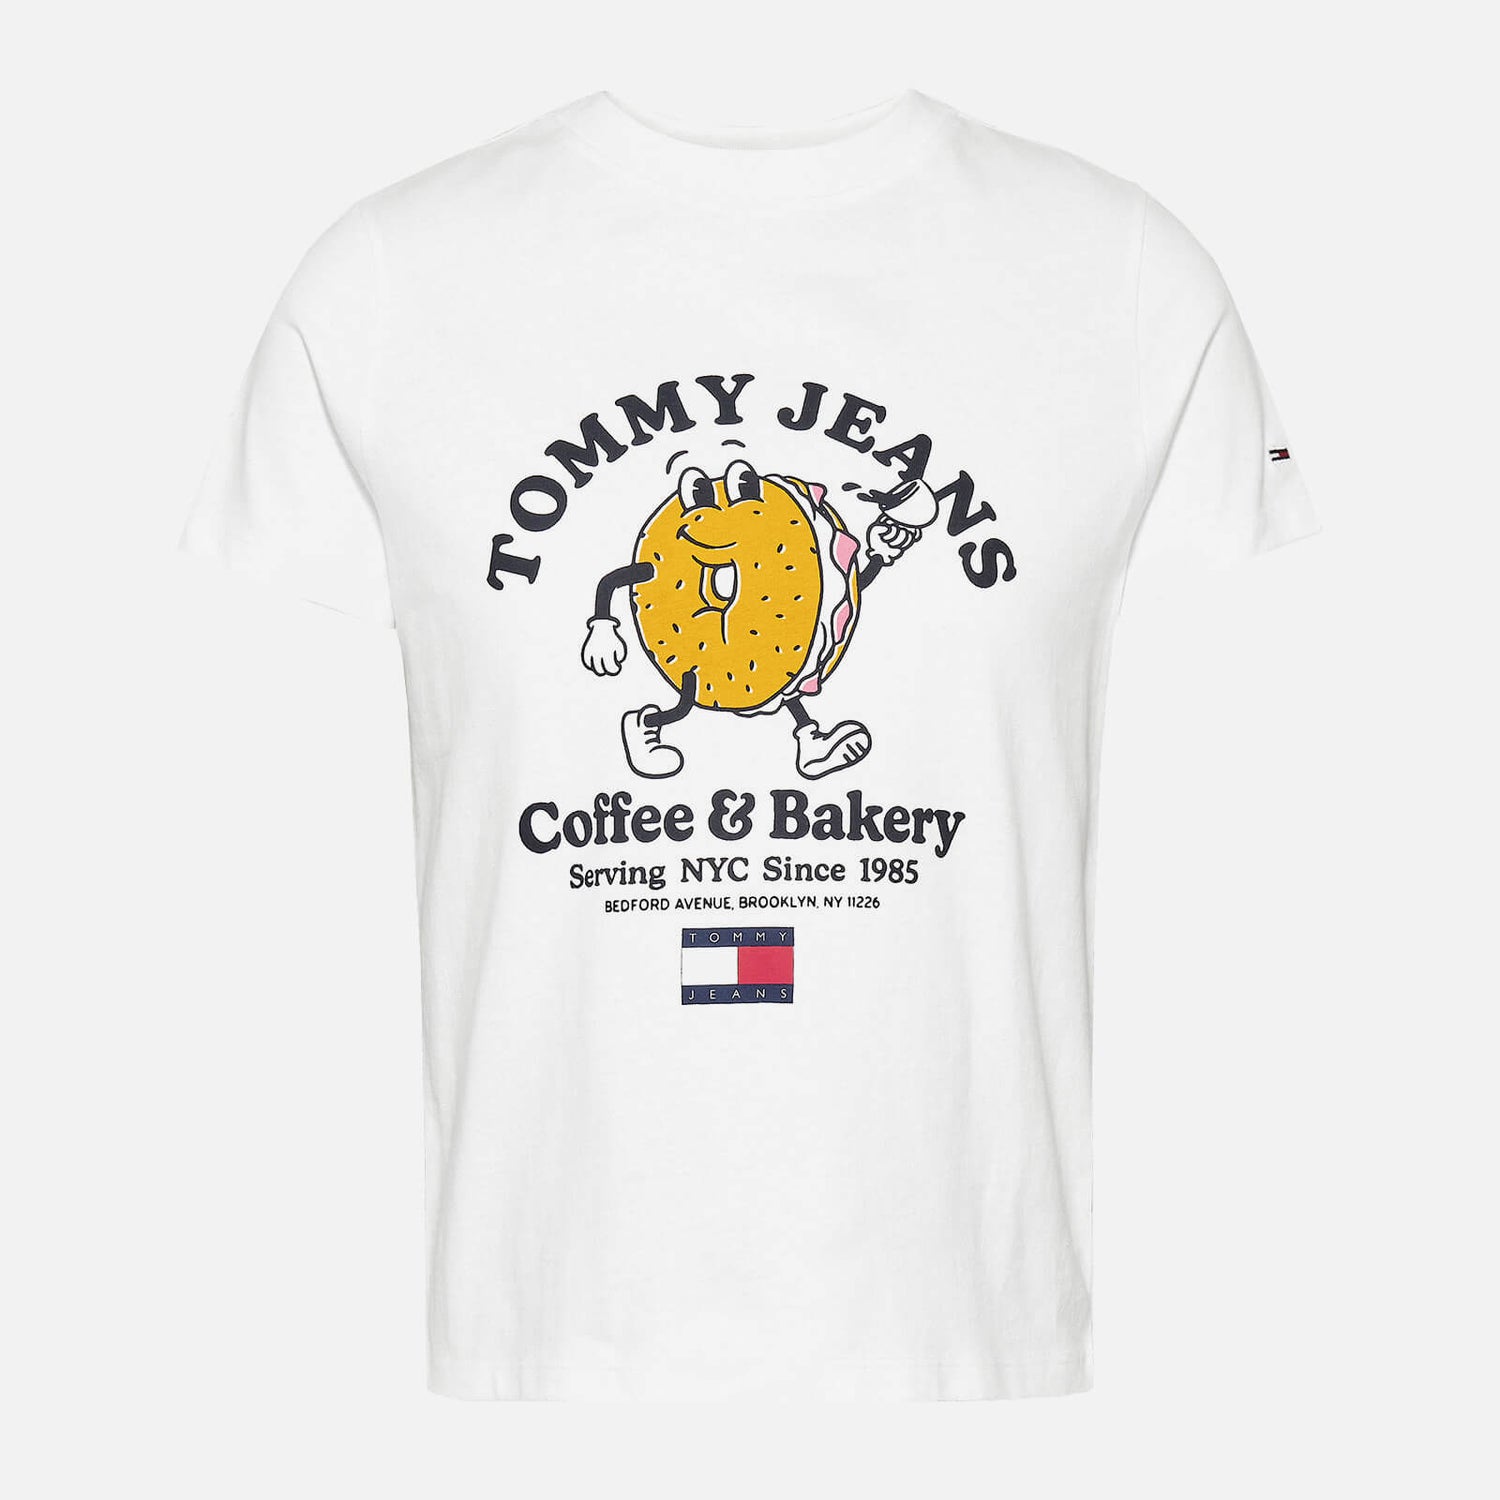 Tommy Jeans Designer Print Recycled Cotton-Jersey T-Shirt - XS